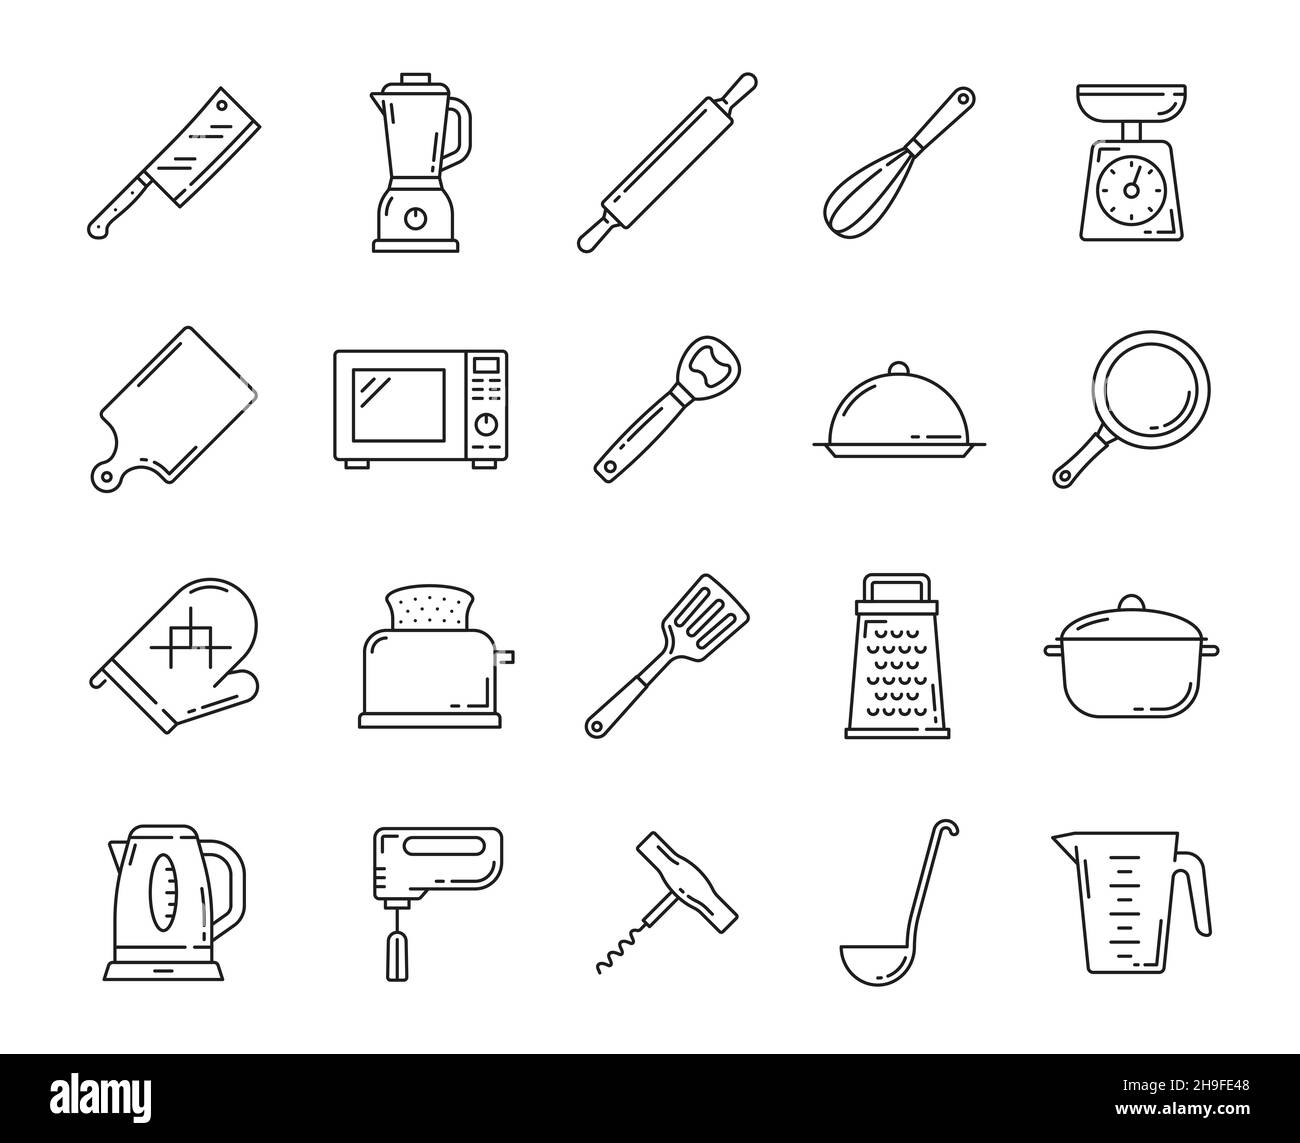 https://c8.alamy.com/comp/2H9FE48/kitchenware-thin-line-icons-kitchen-equipment-cooking-utensil-and-culinary-dishware-vector-kitchenware-appliances-microwave-oven-toaster-and-teap-2H9FE48.jpg